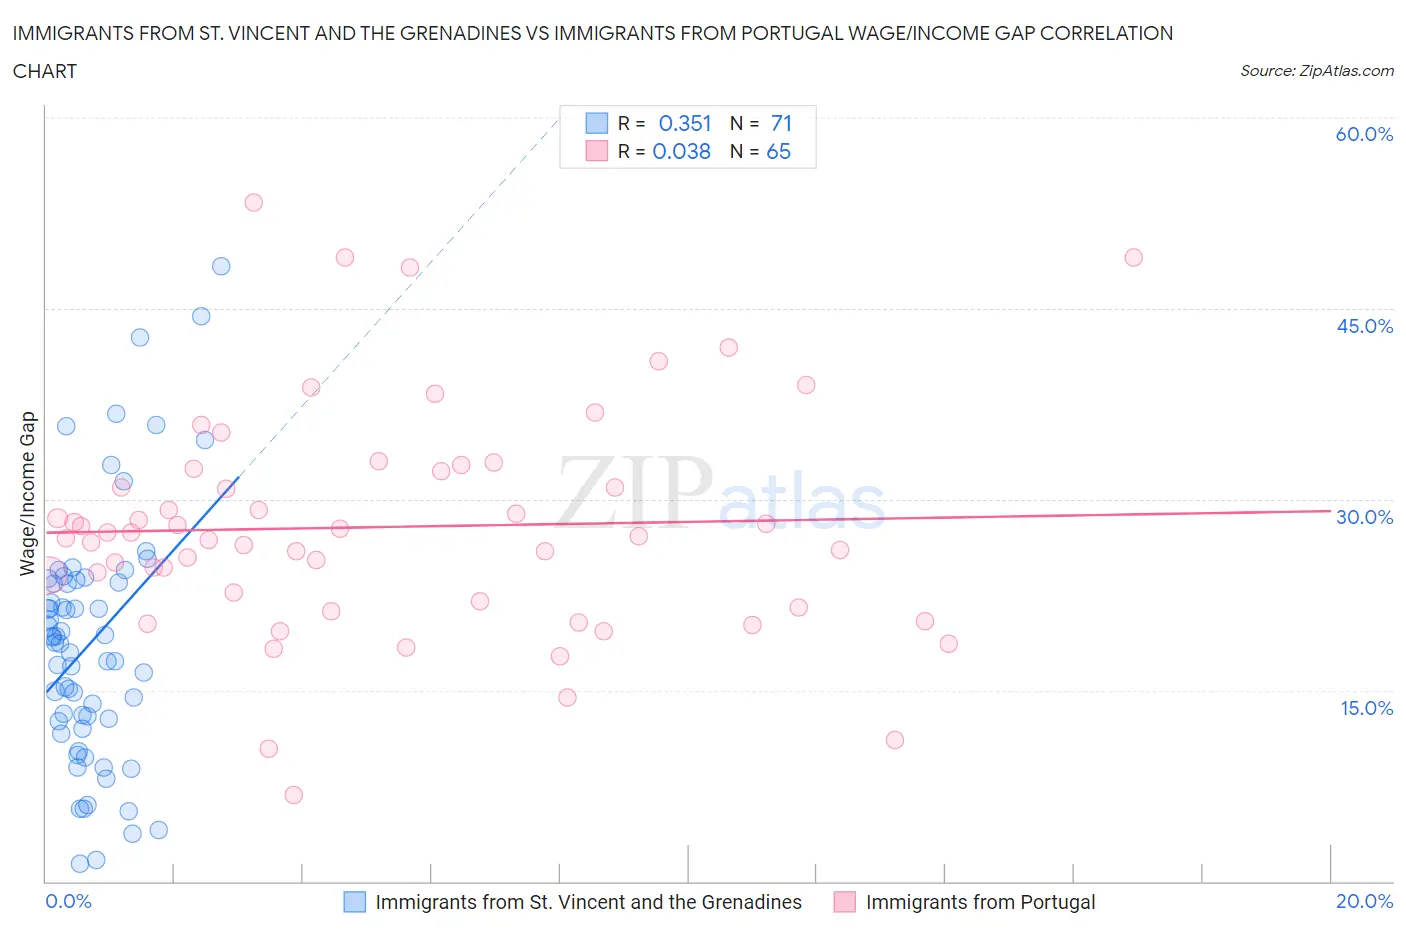 Immigrants from St. Vincent and the Grenadines vs Immigrants from Portugal Wage/Income Gap